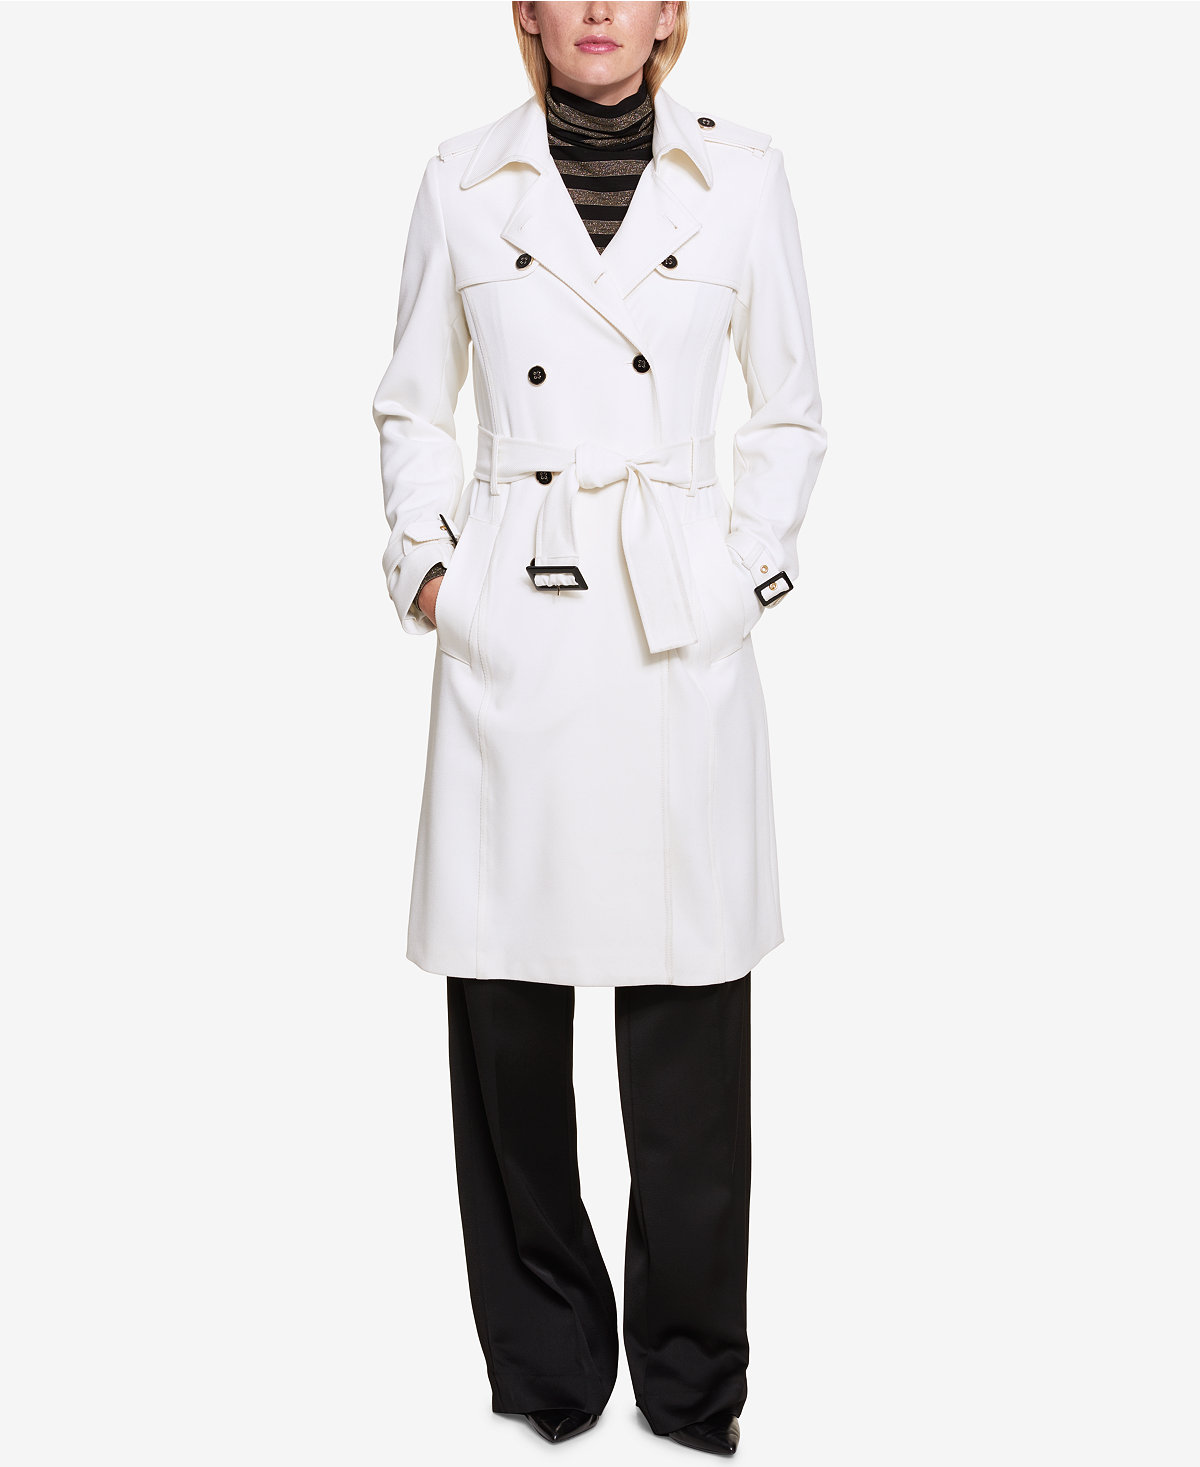 White Trench Coat 2tommy hilfiger belted trench coat, $99.99 POYNBFQ